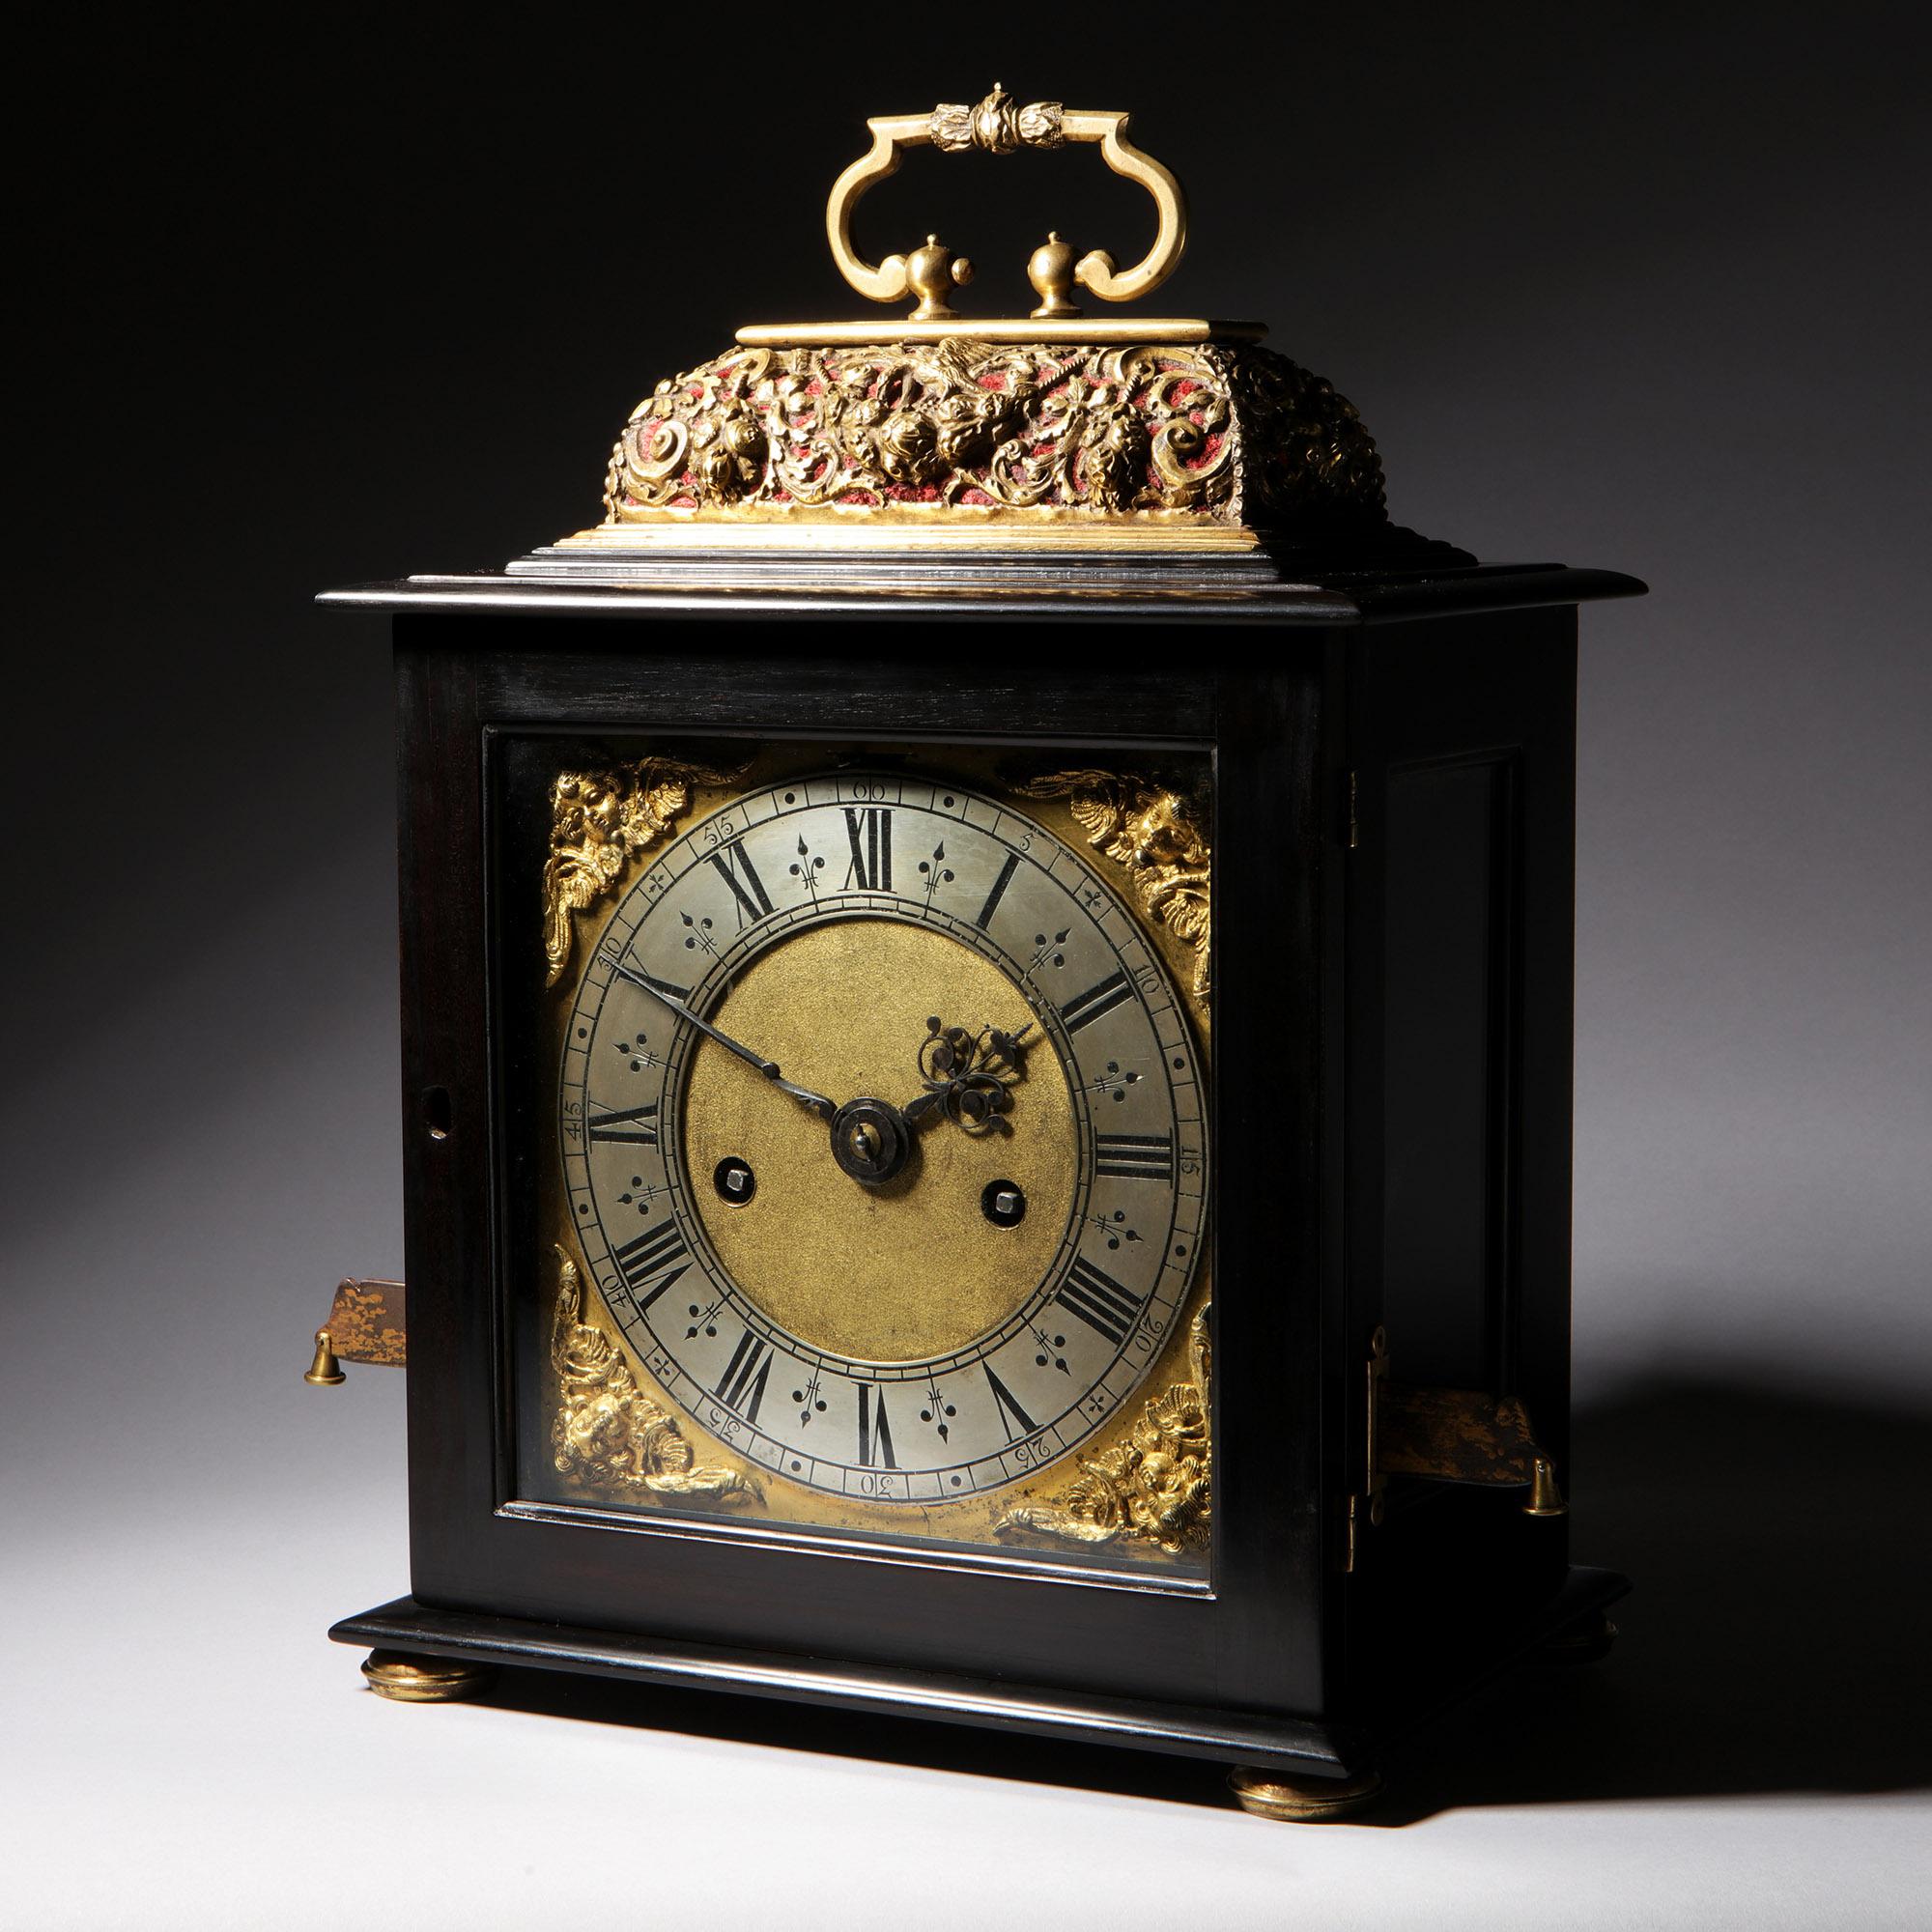 English A Rare and Important Charles II 17th Century Table Clock by Henry Jones For Sale